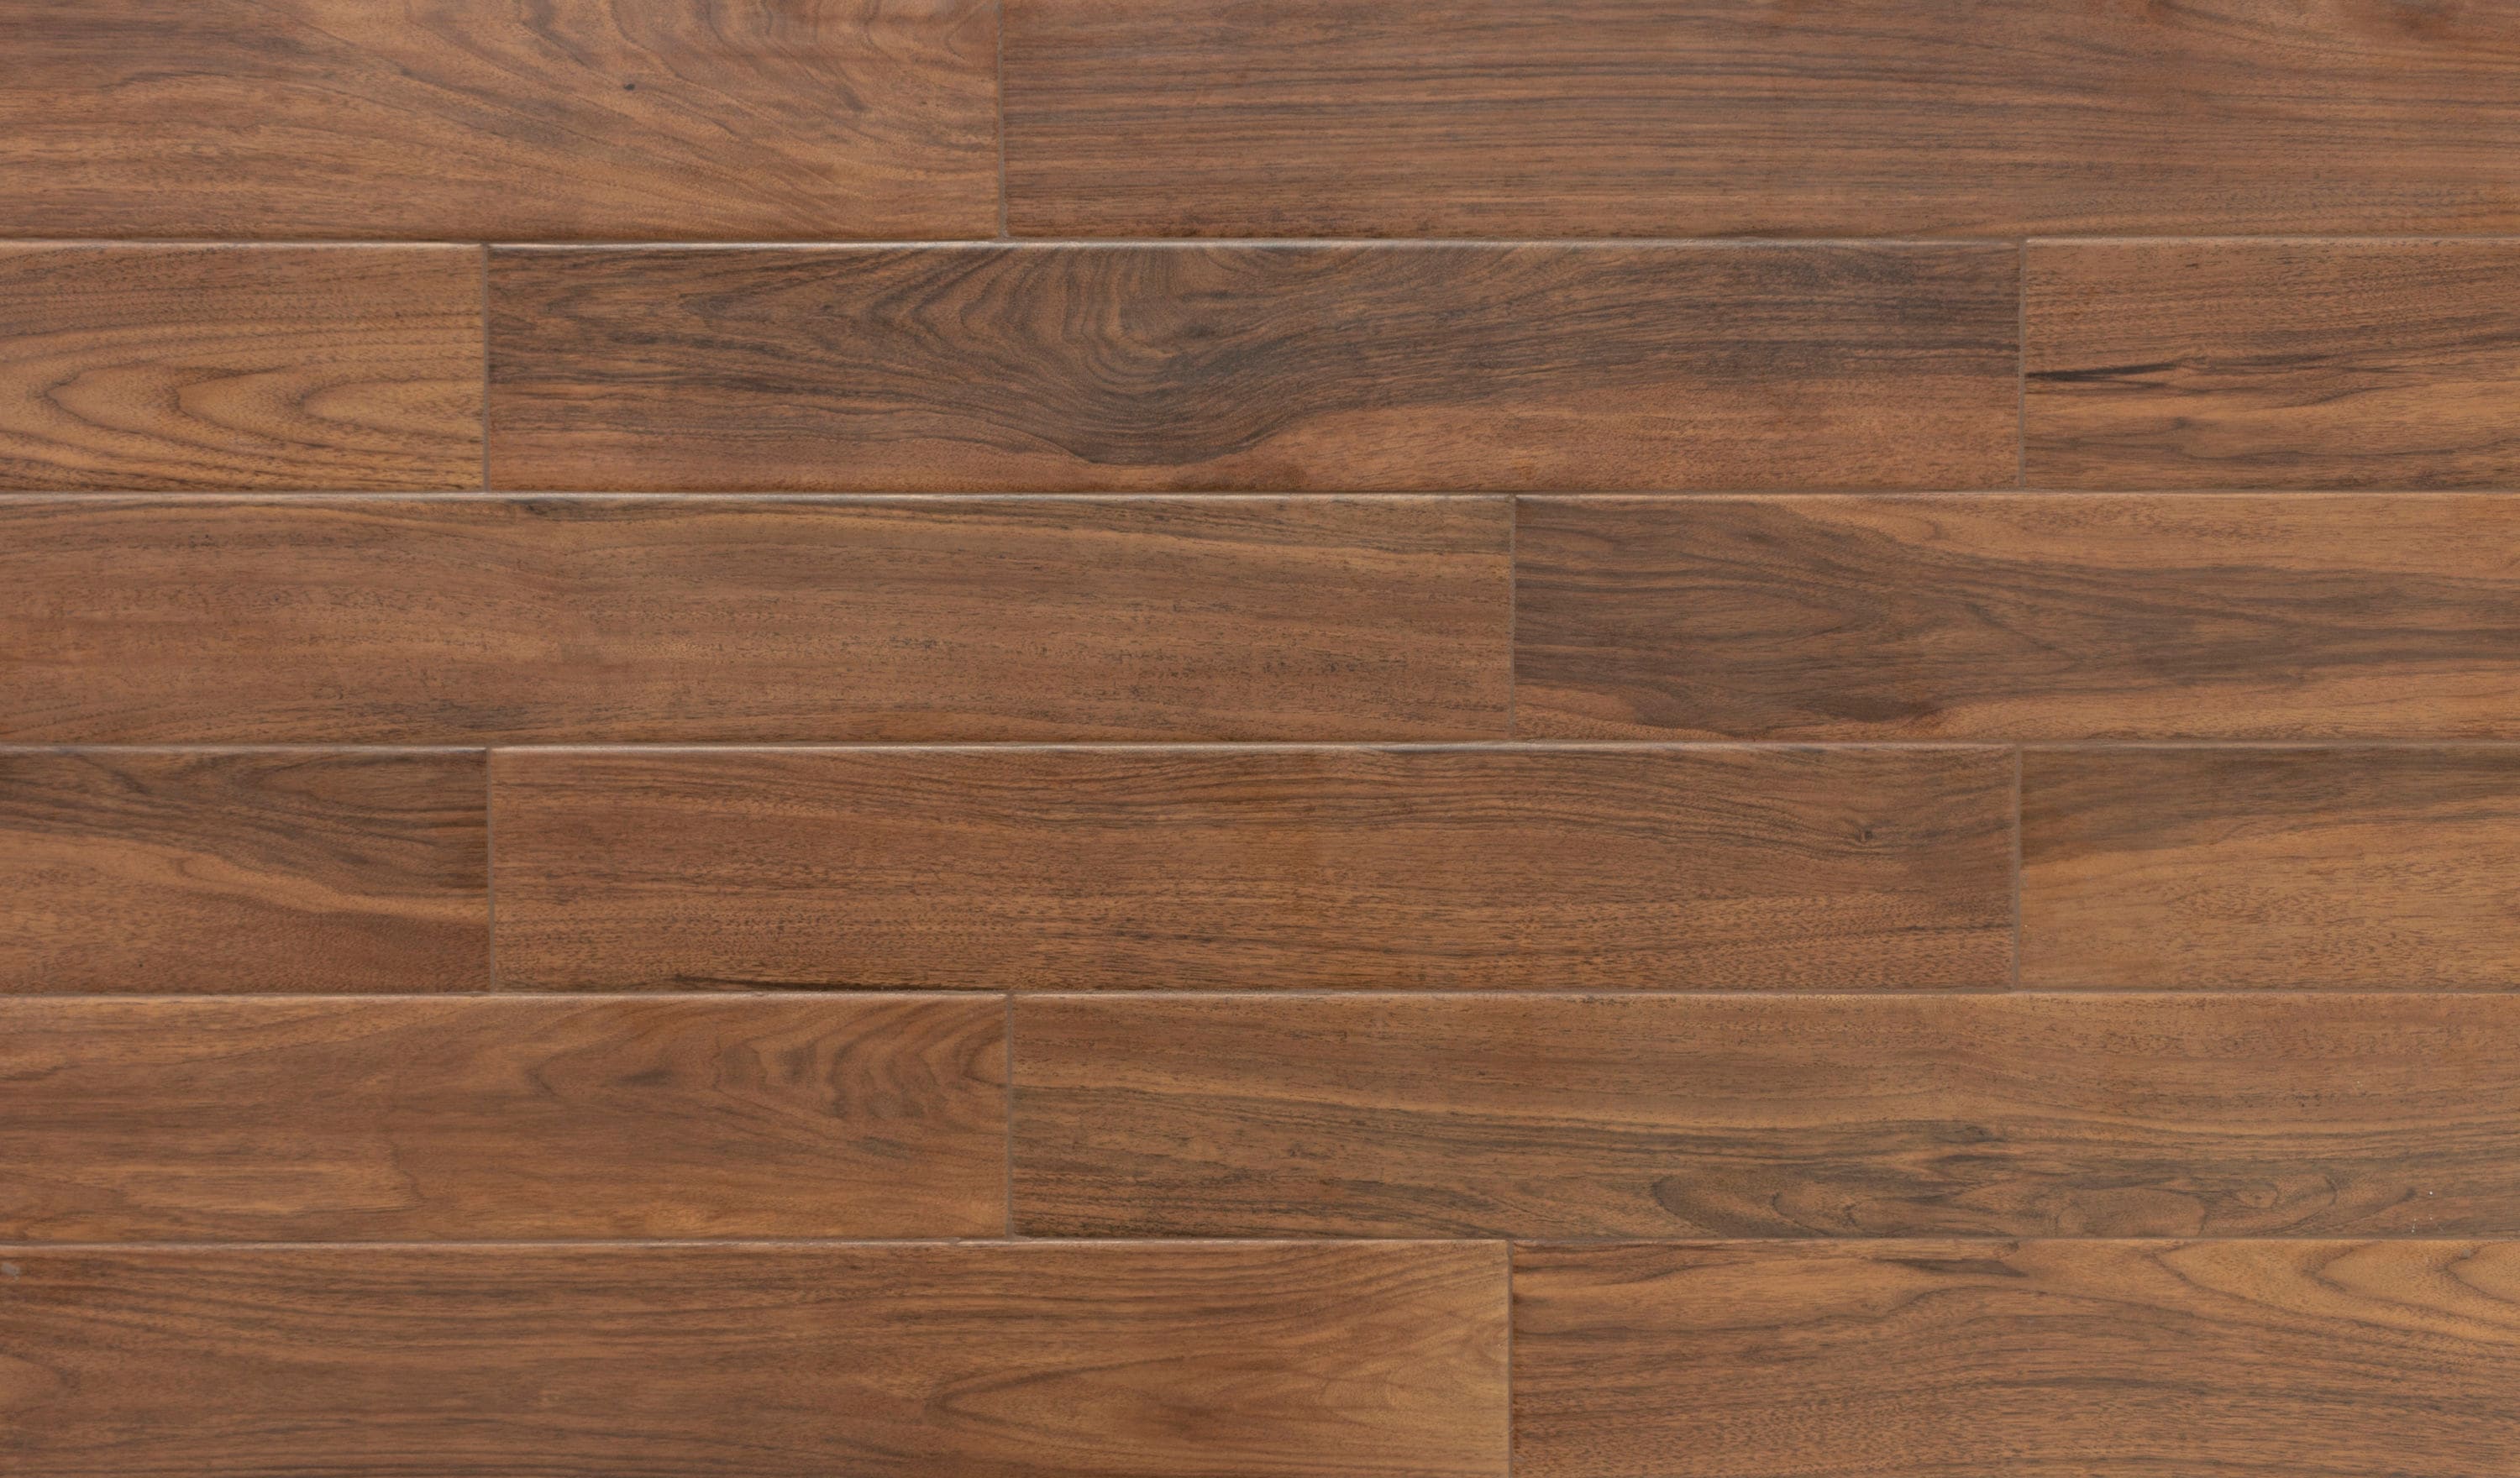 Wood Oak Wood Look Porcelain Wall and Floor Tile - 6 x 24 in. - The Tile  Shop